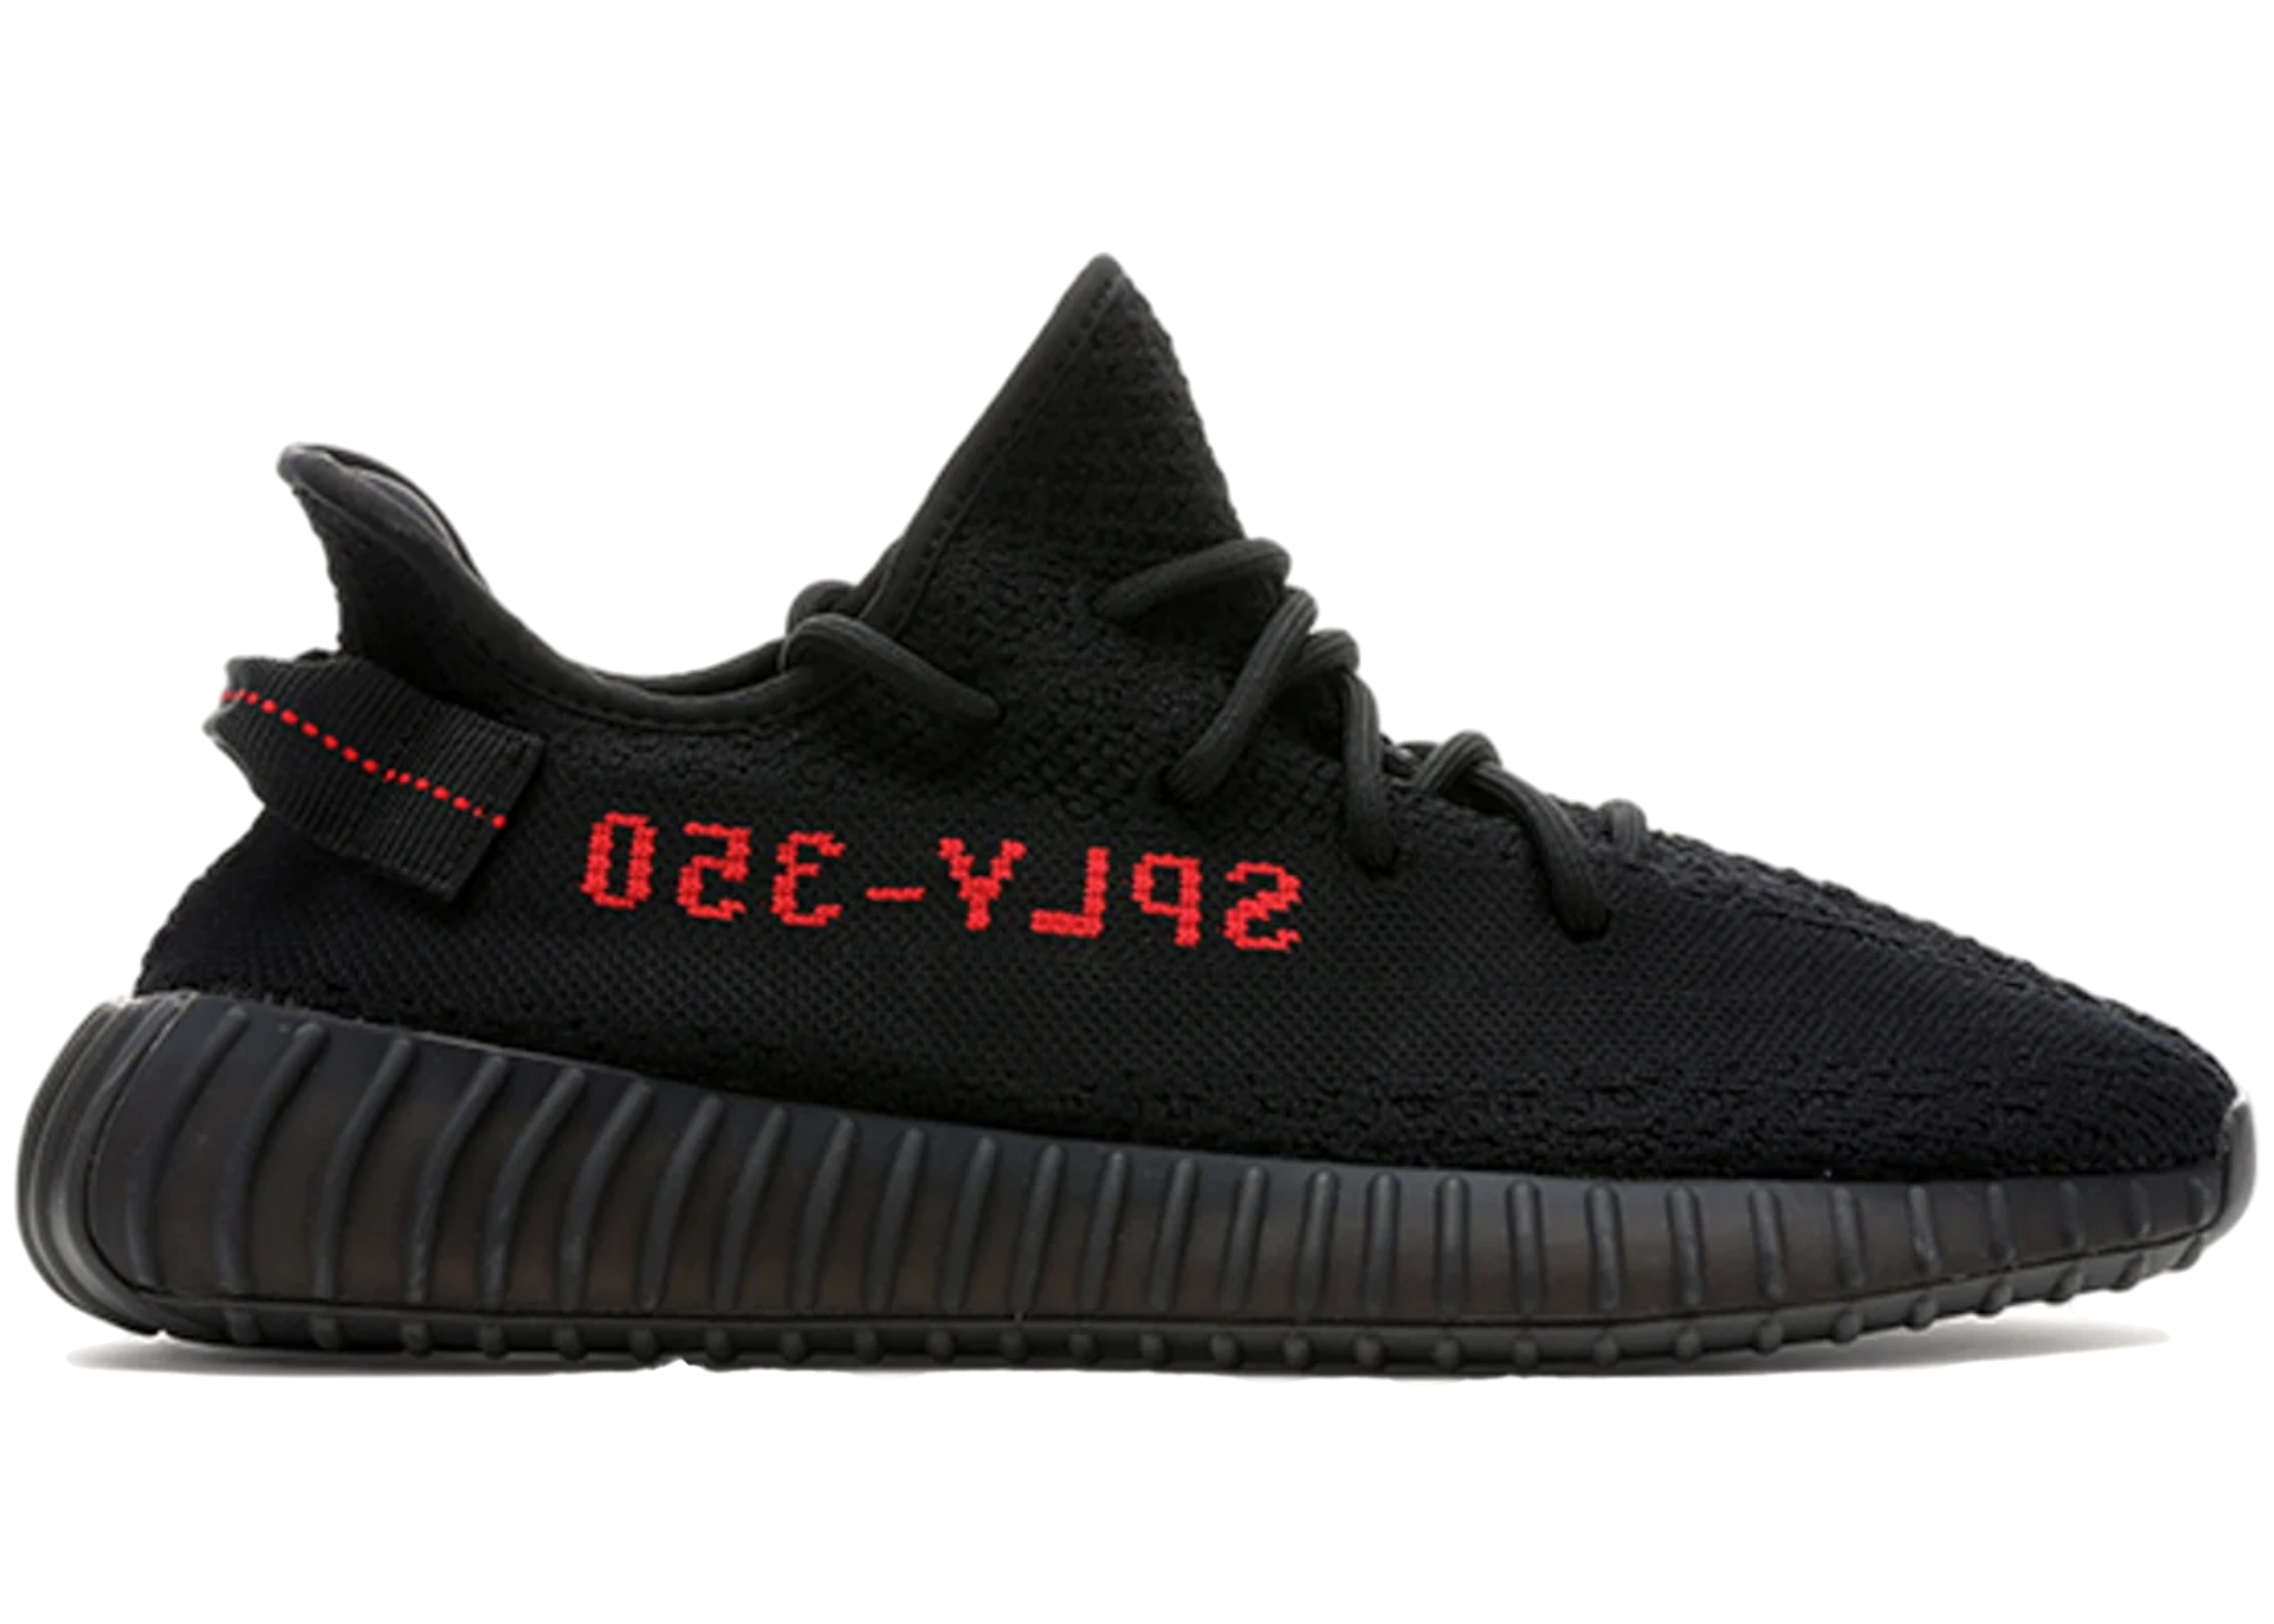 YEEZY BOOST 350 BRED